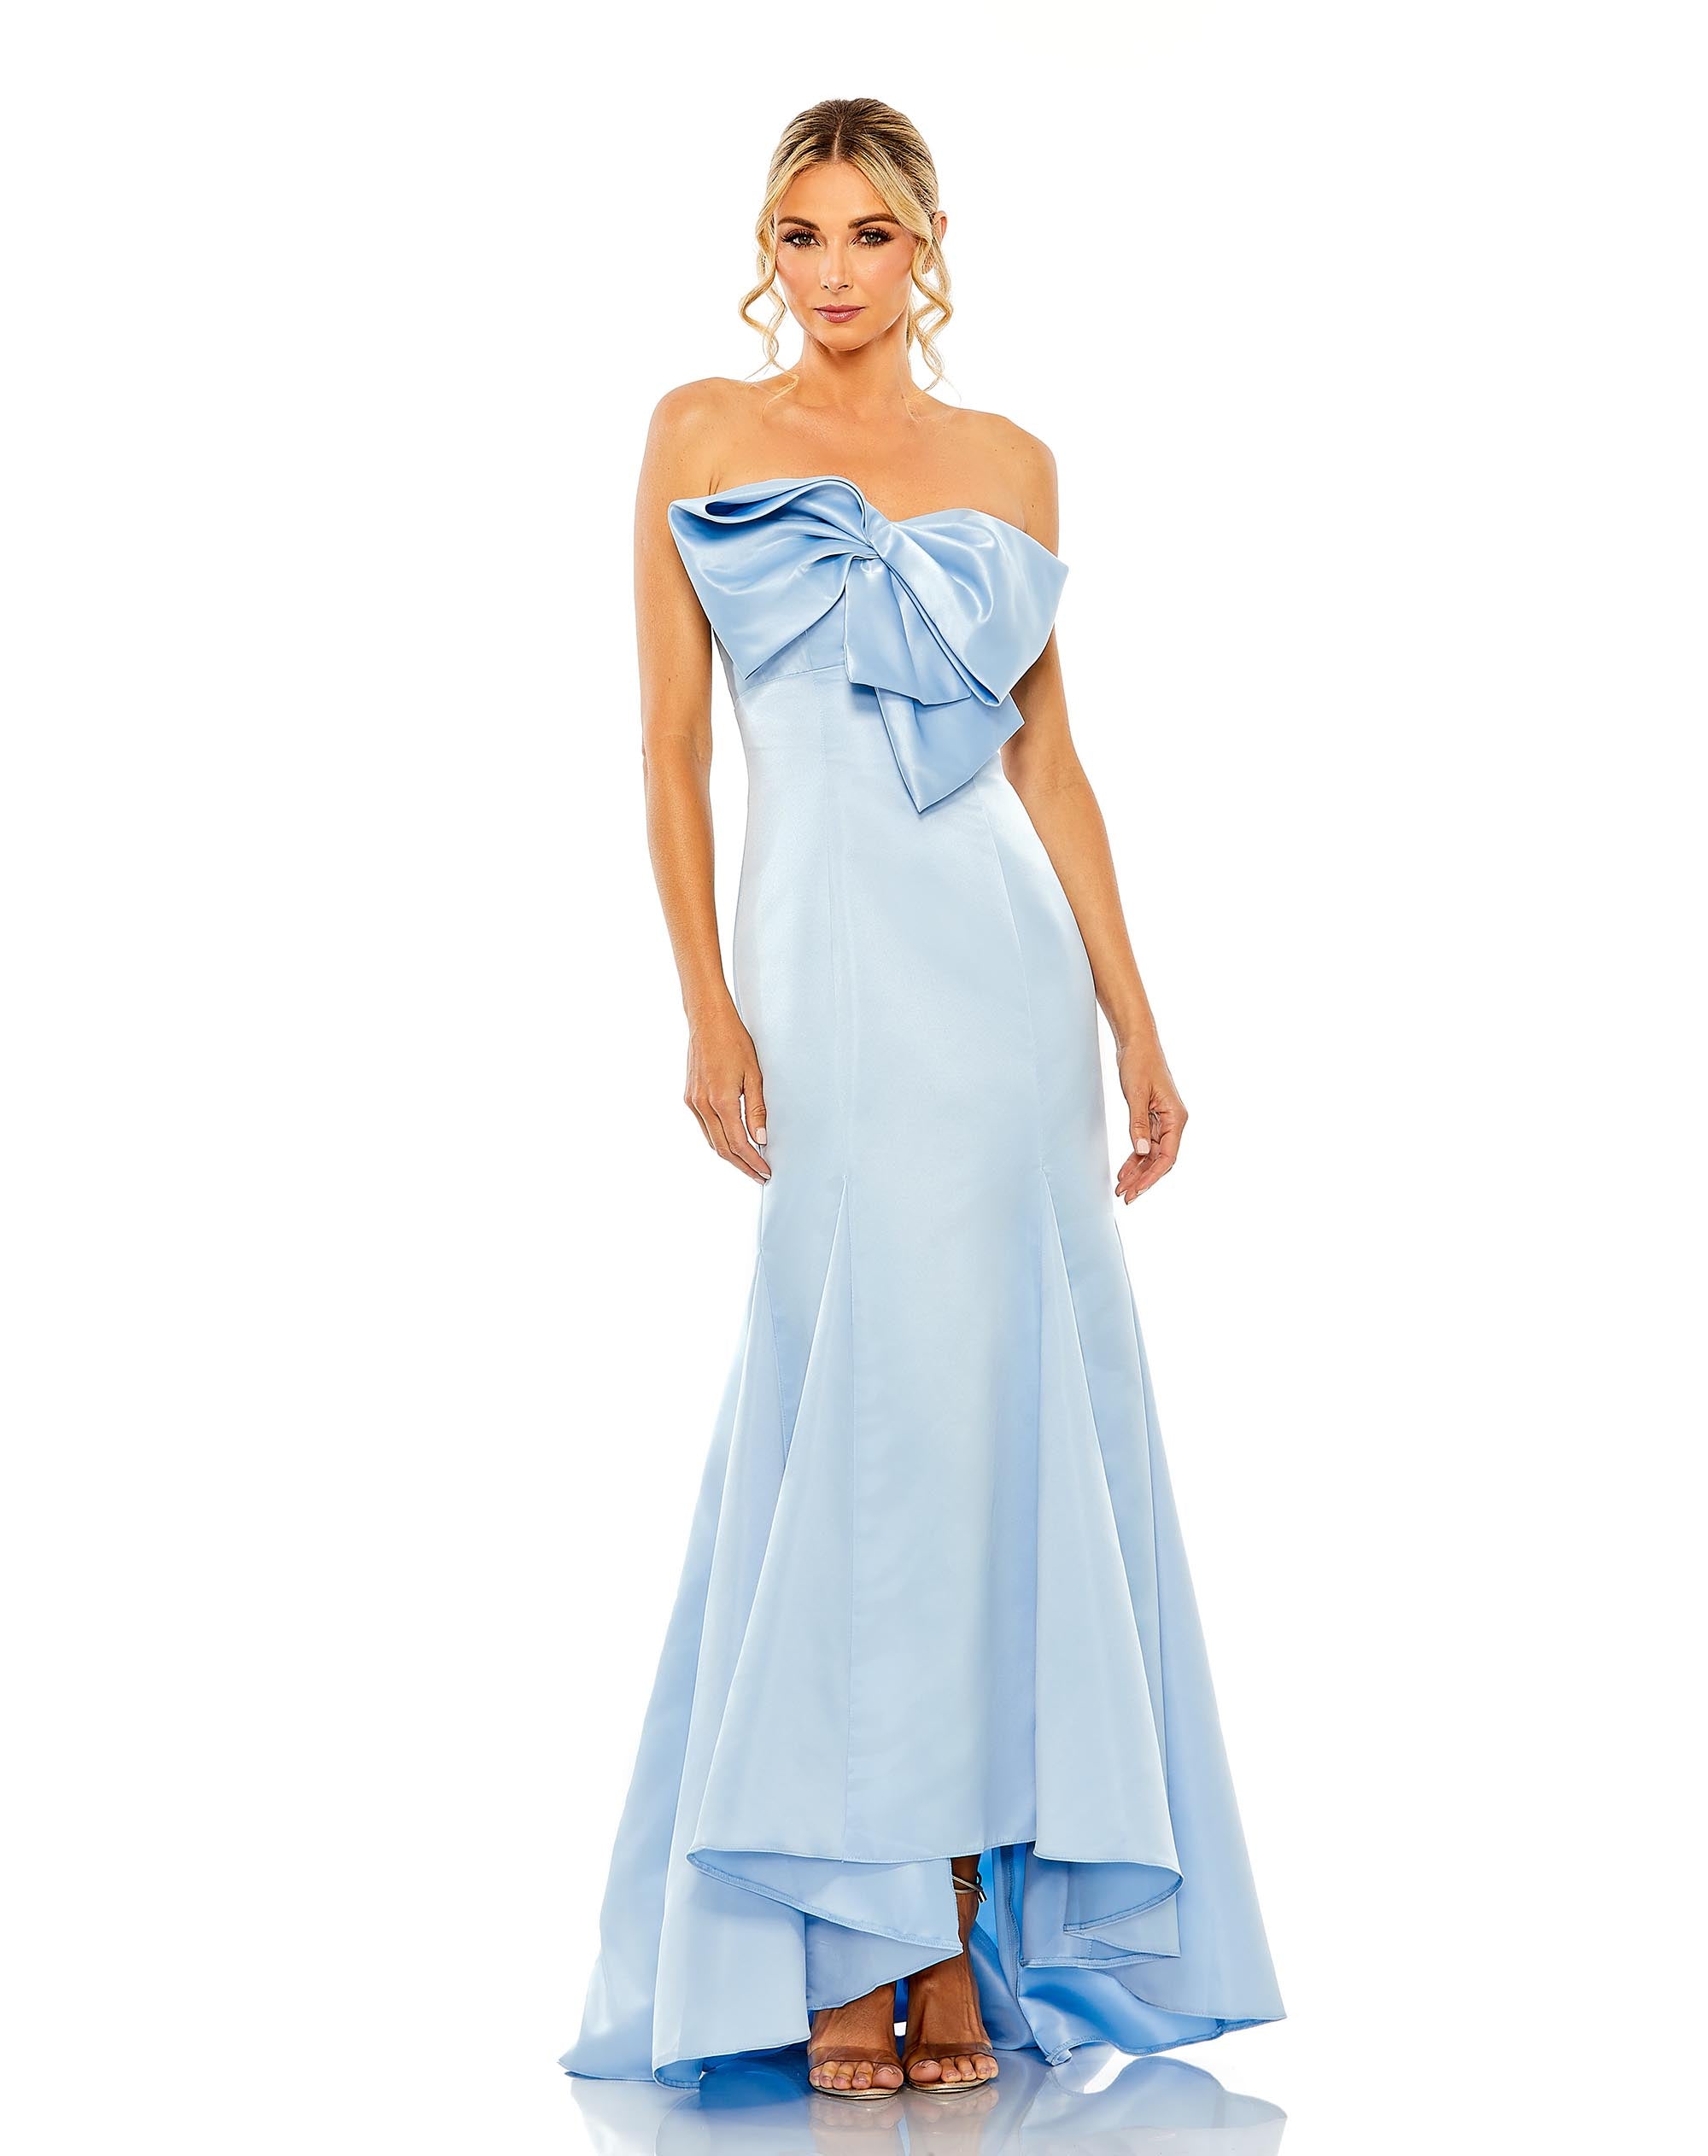 Strapless Mermaid Gown